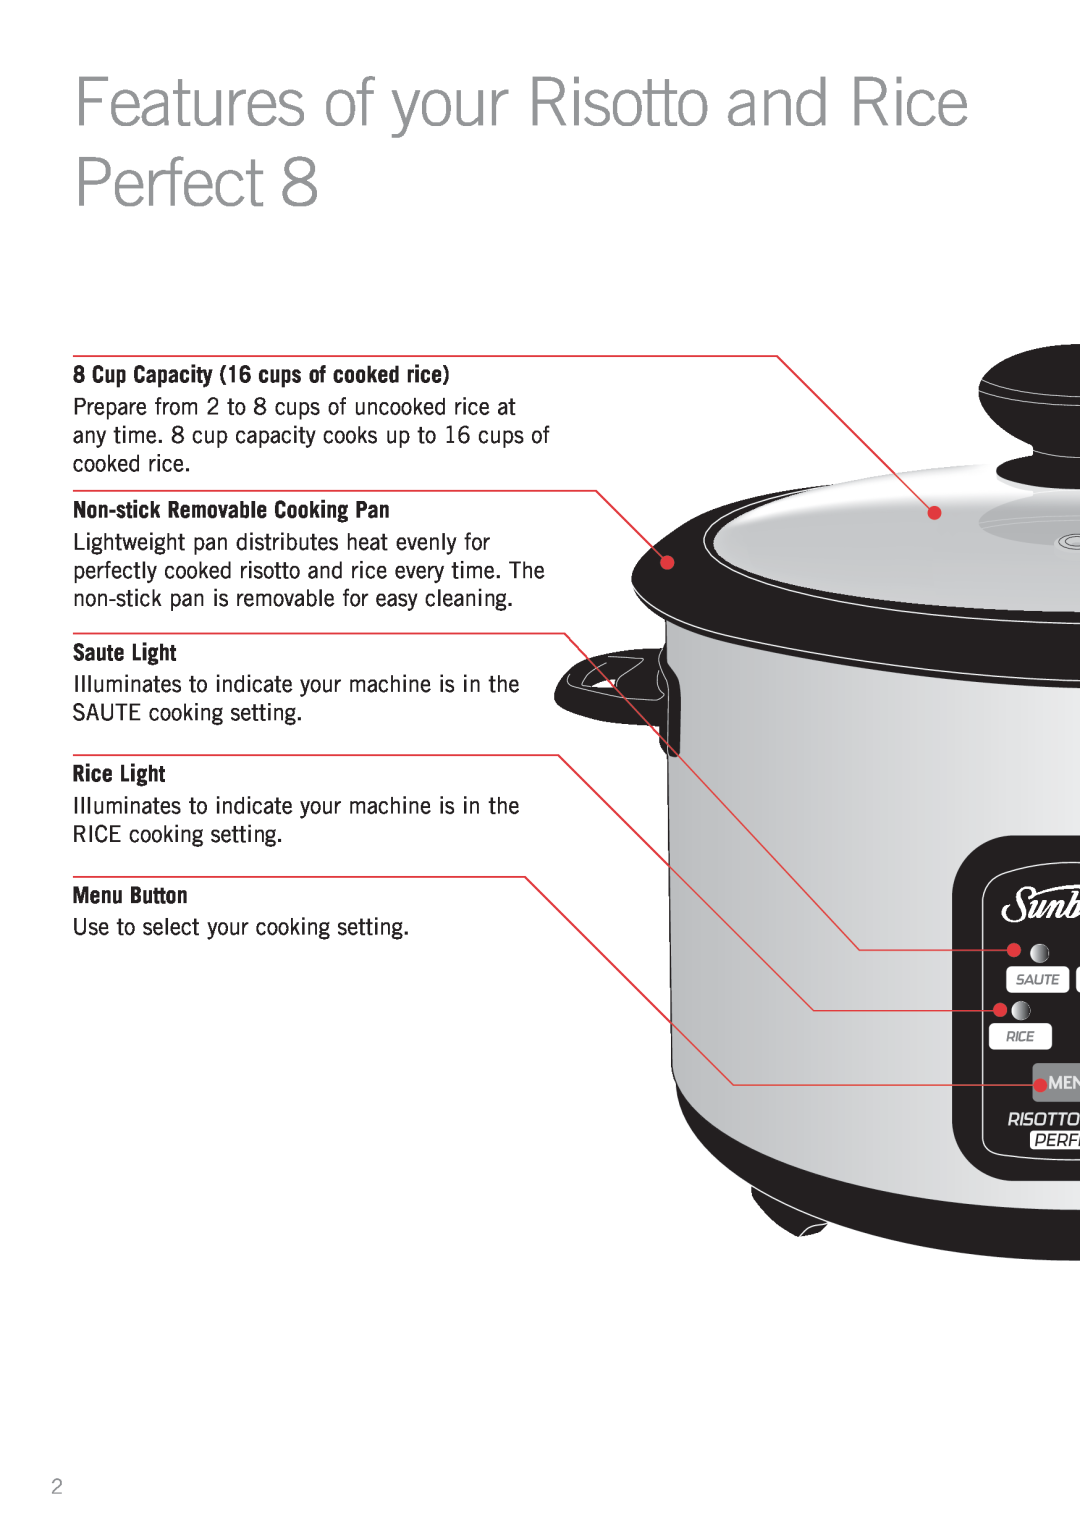 Sunbeam RC4900 Features of your Risotto and Rice Perfect, Cup Capacity 16 cups of cooked rice, Saute Light, Rice Light 